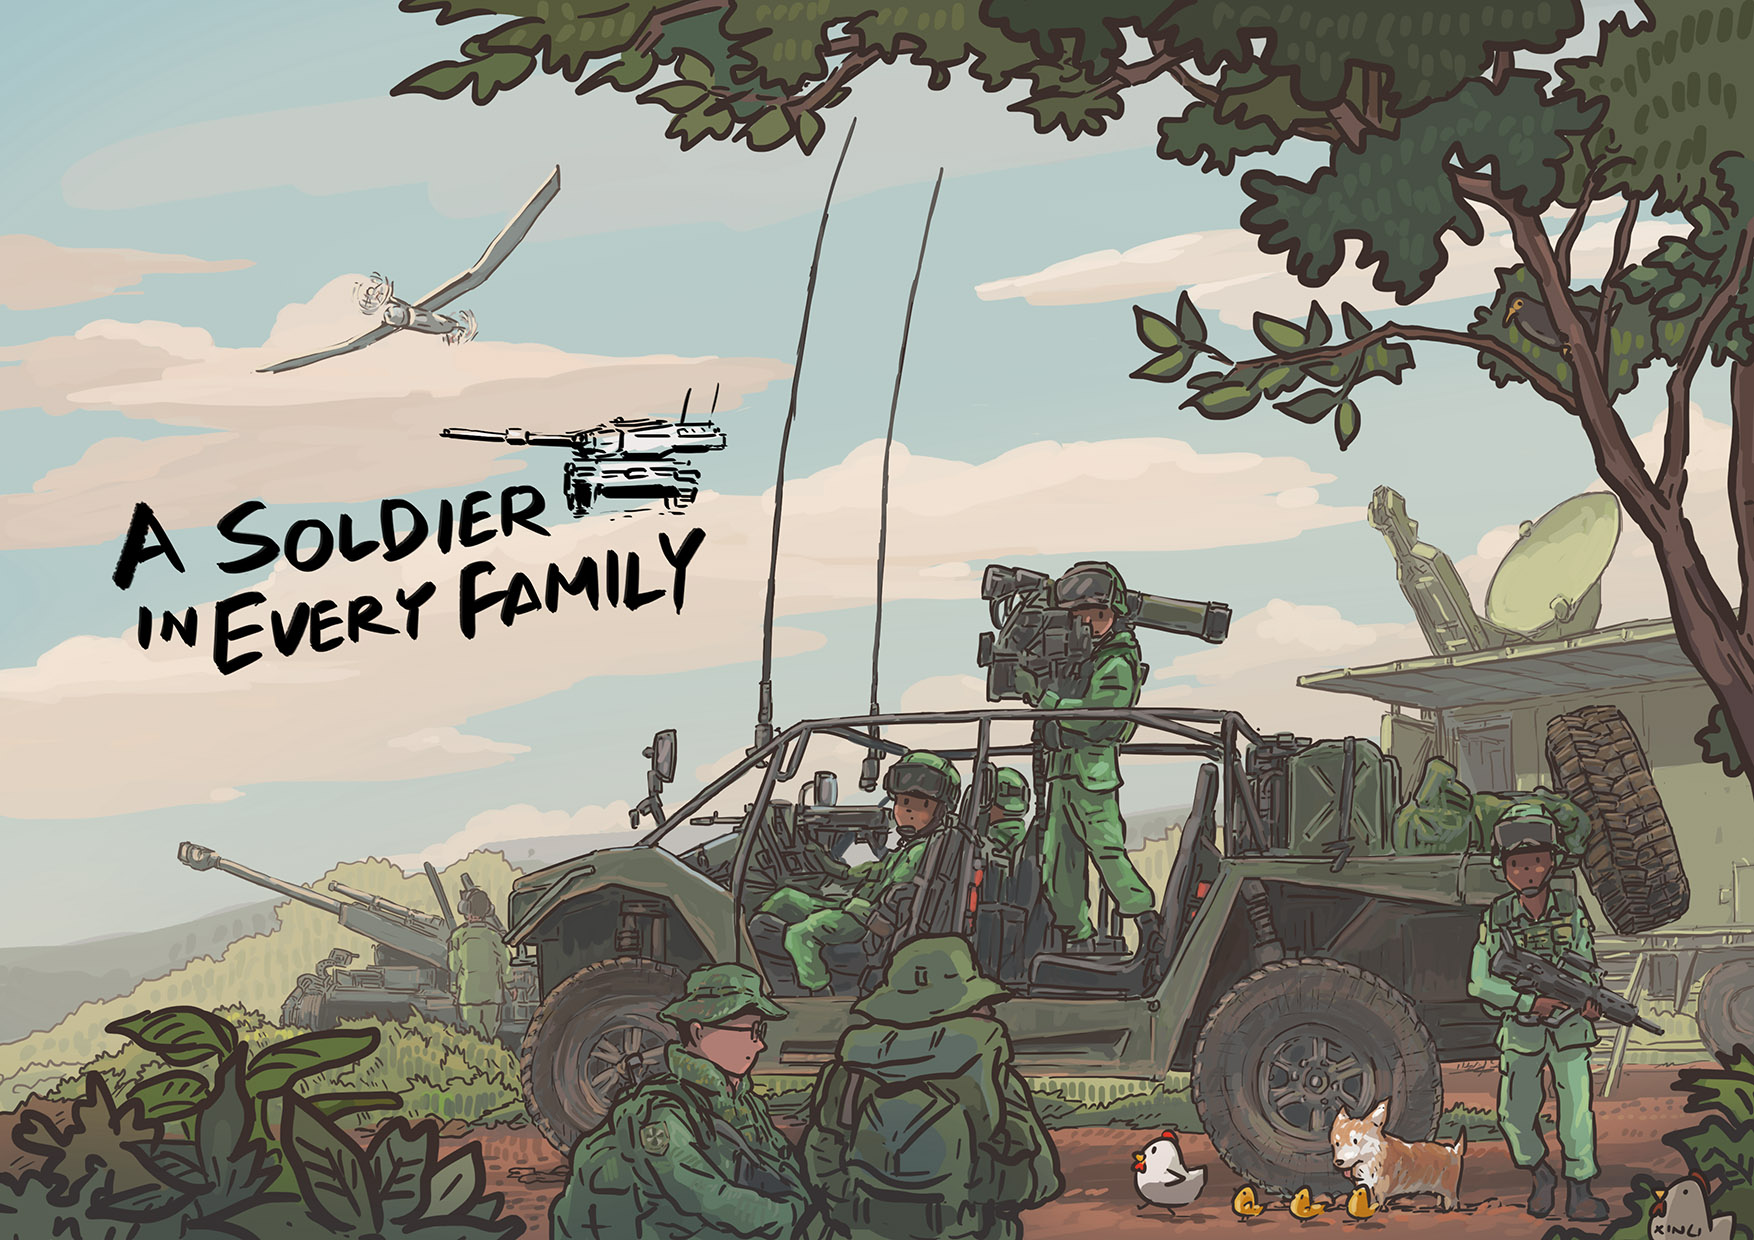 "A Soldier in Every Family"